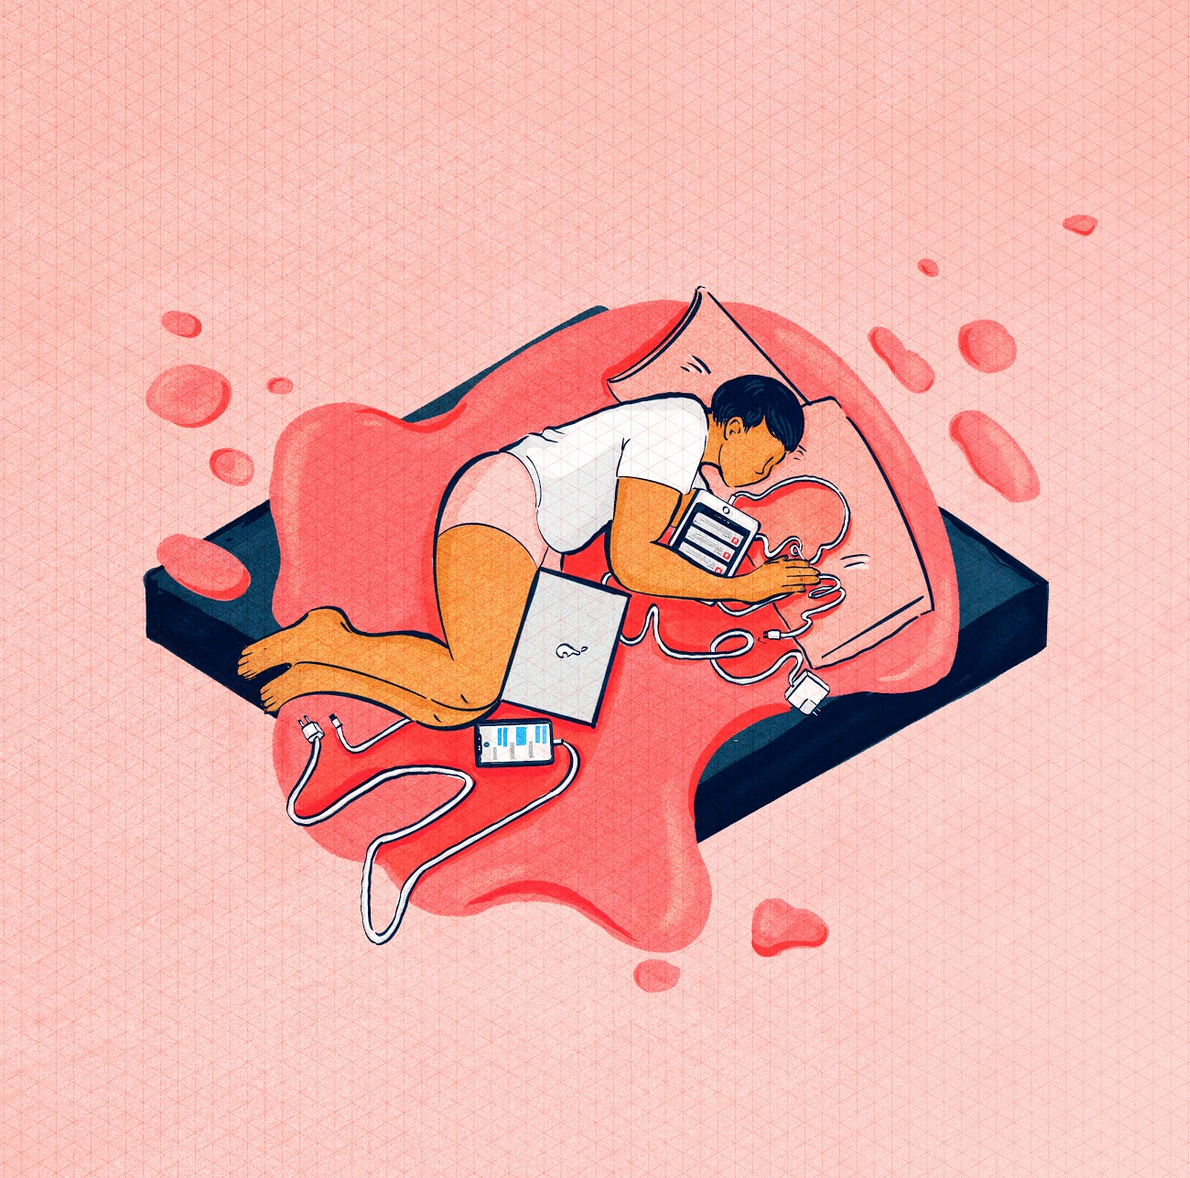 Illustration of a person in bed with all their electronic devicies